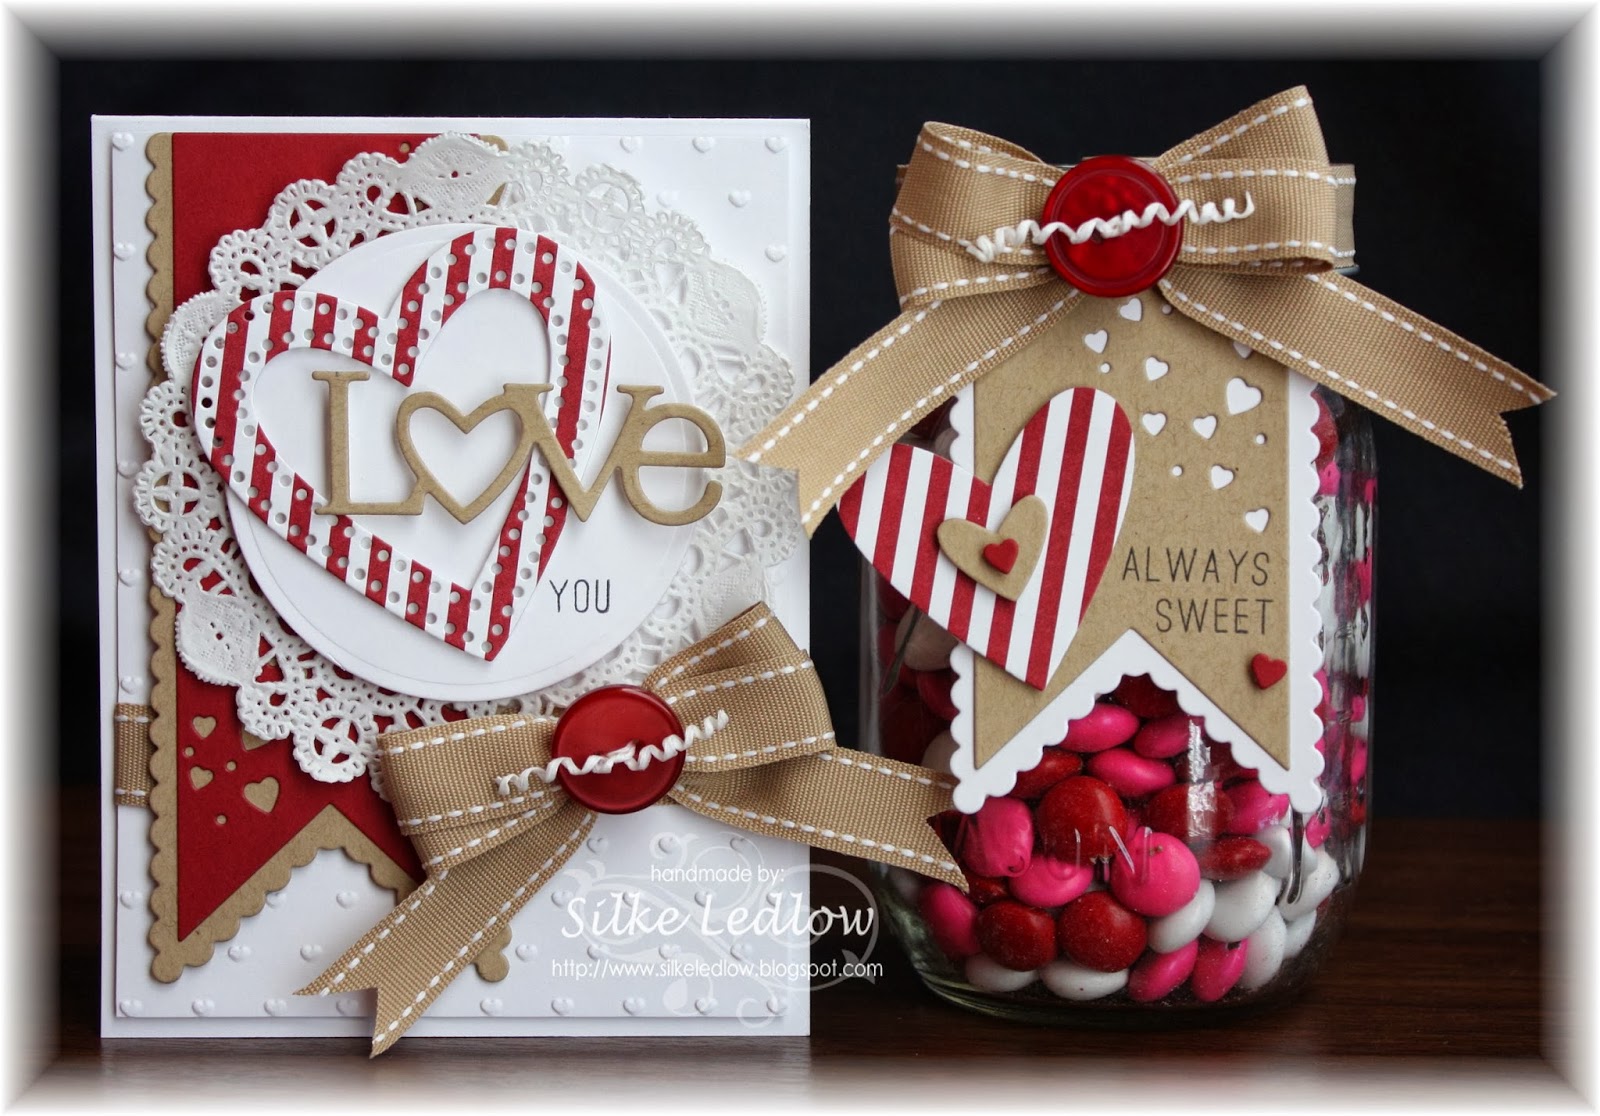 Paper Crafted Mason Jar Gift